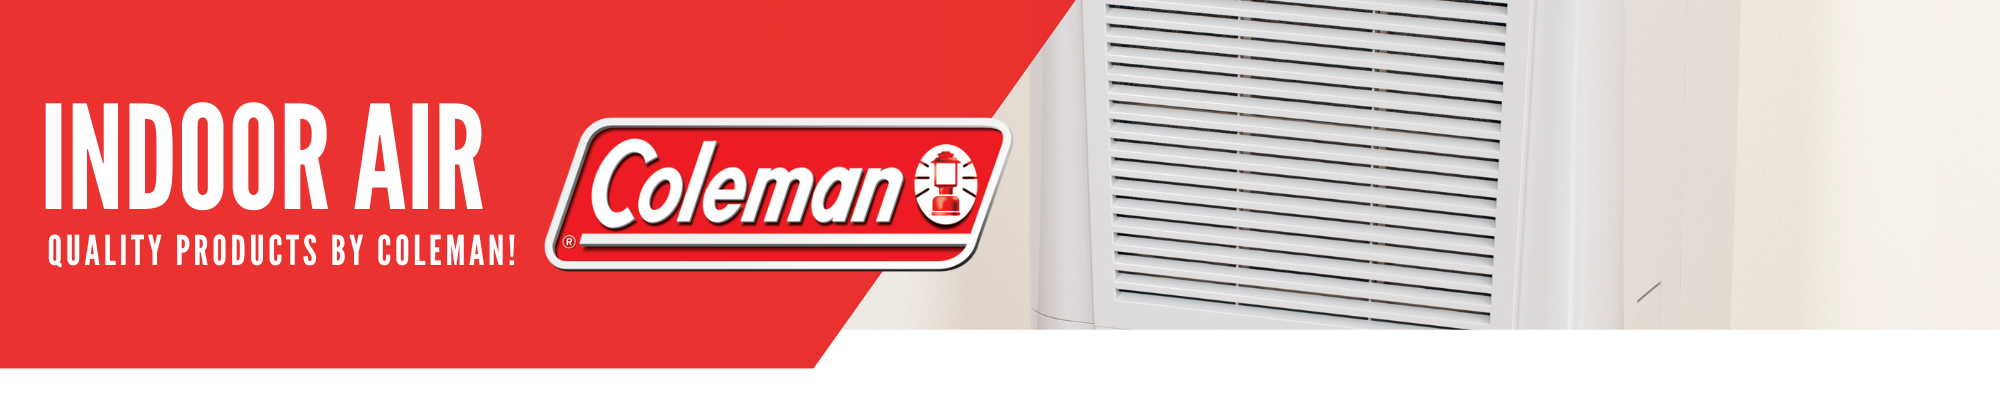 Coleman indoor air quality products